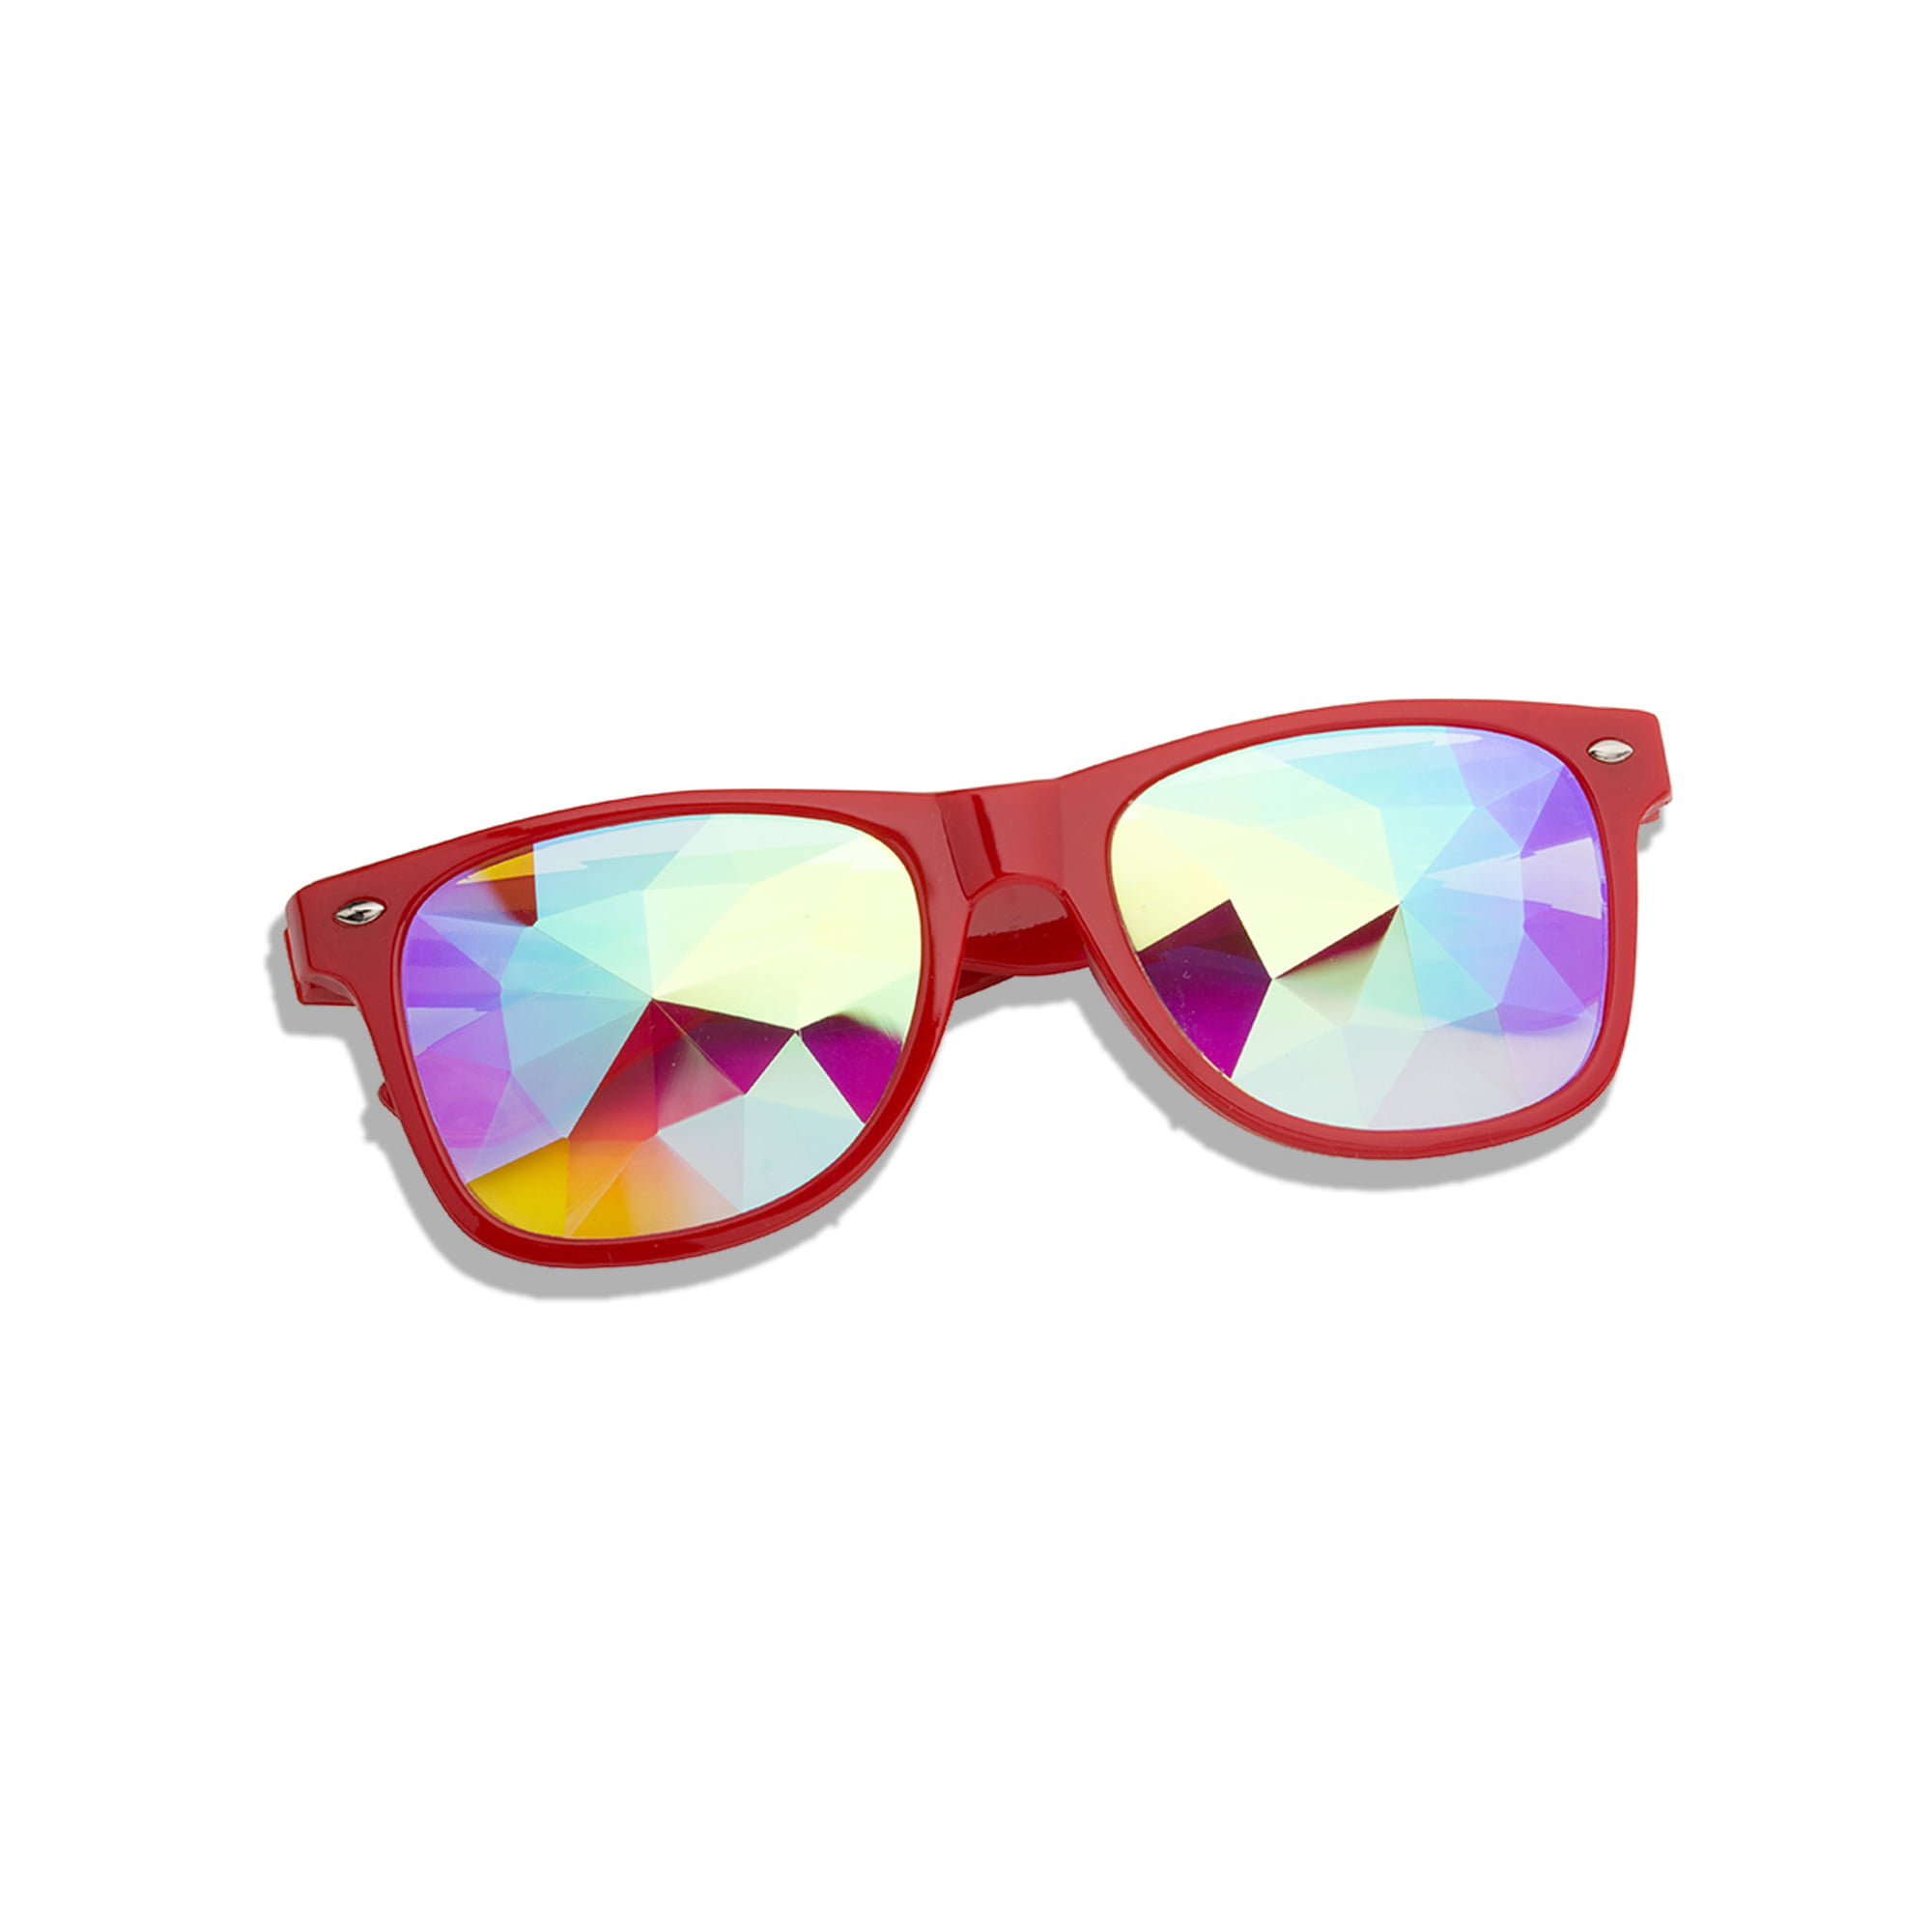 STLY Kaleidoscope Glasses Rainbow Rave Prism Diffraction Googles 